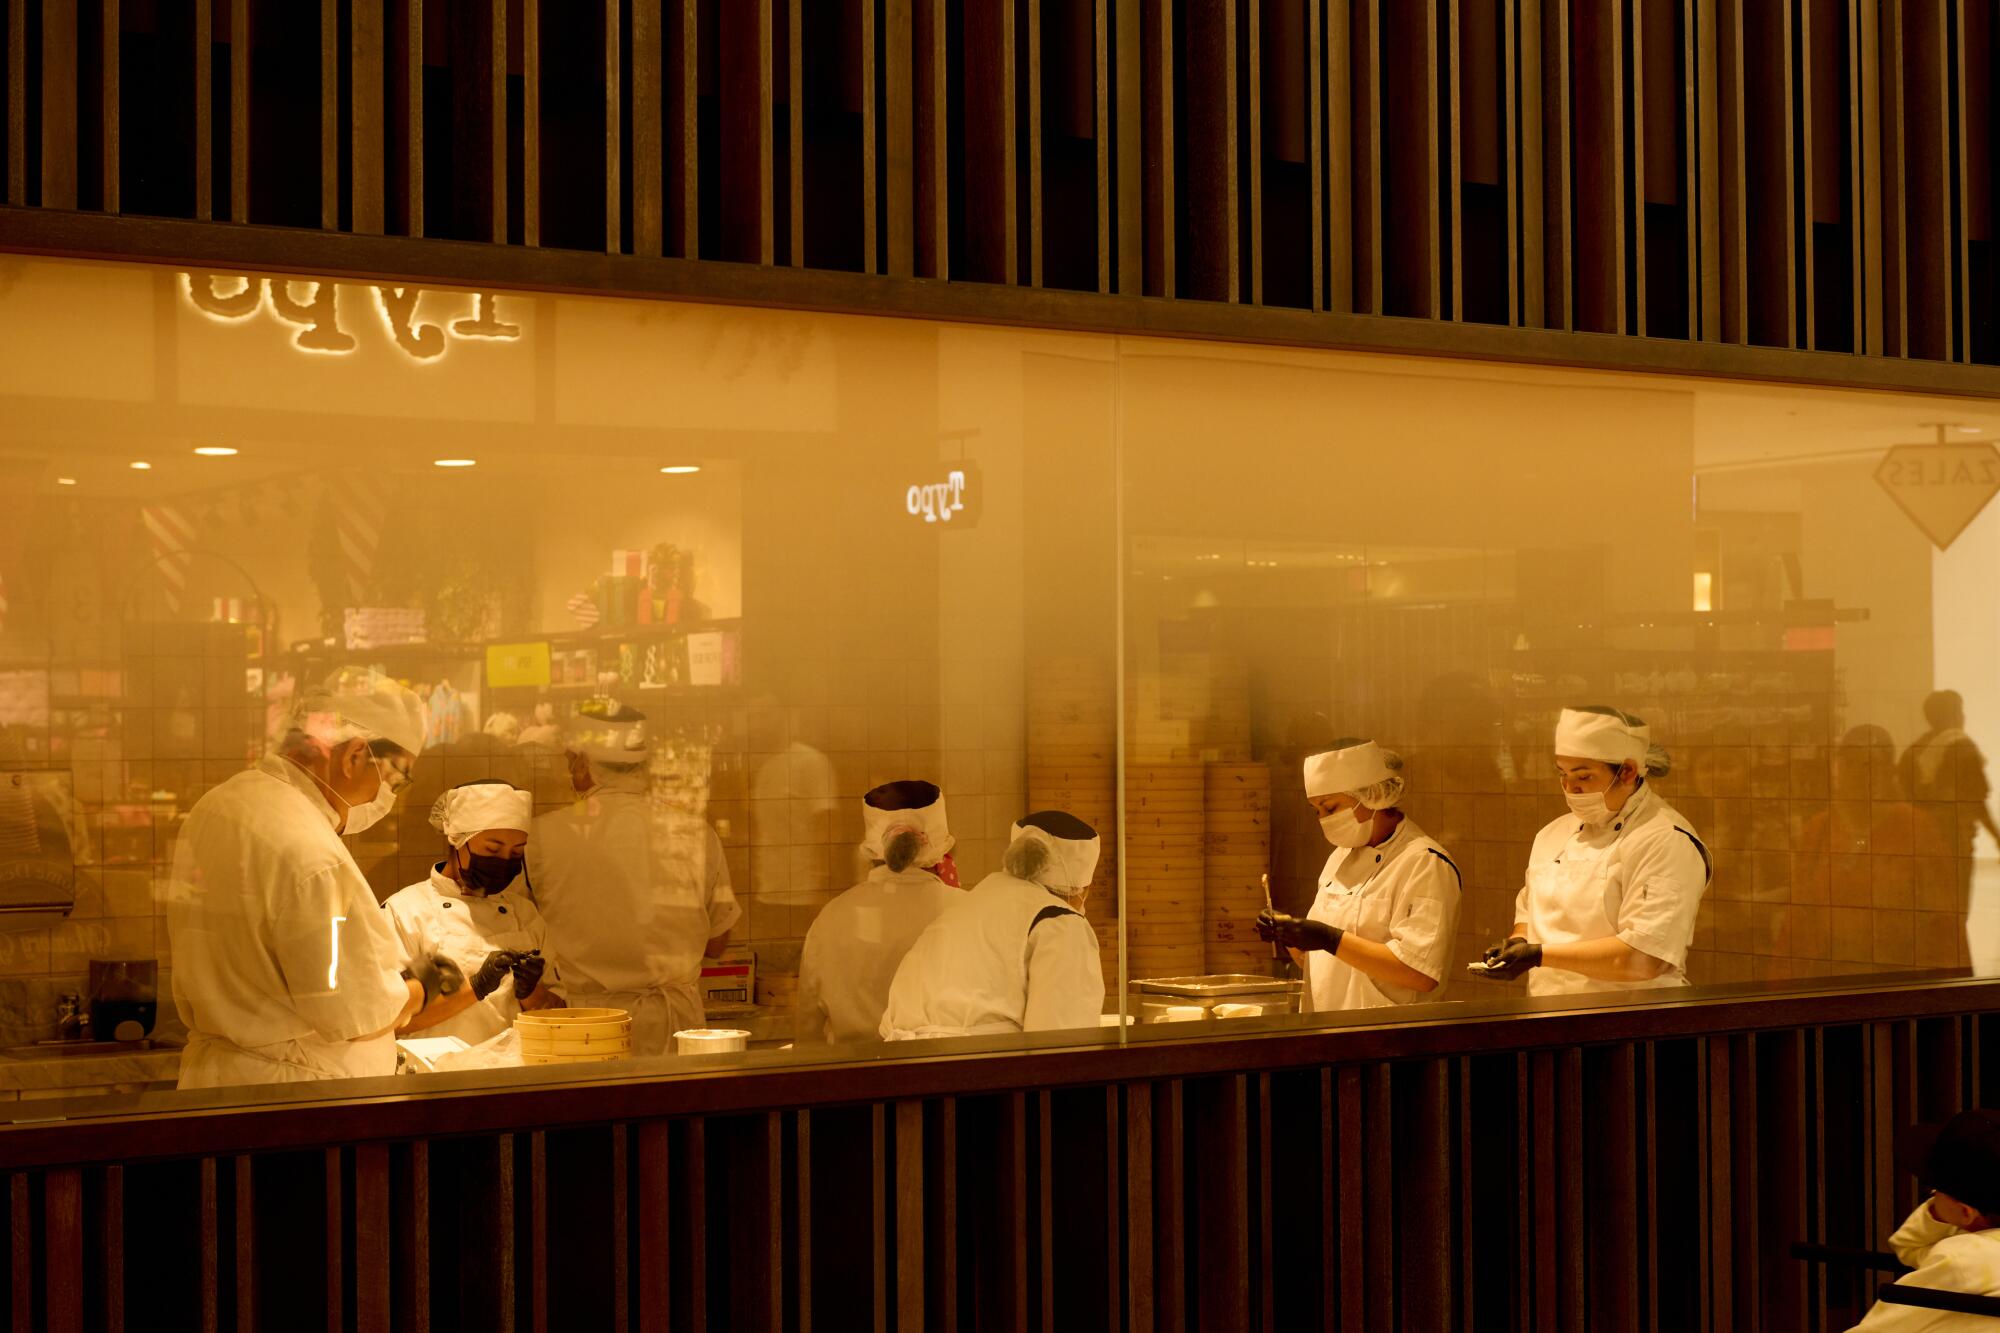 Xiao long bao being made from the display room at Din Tai Fung.